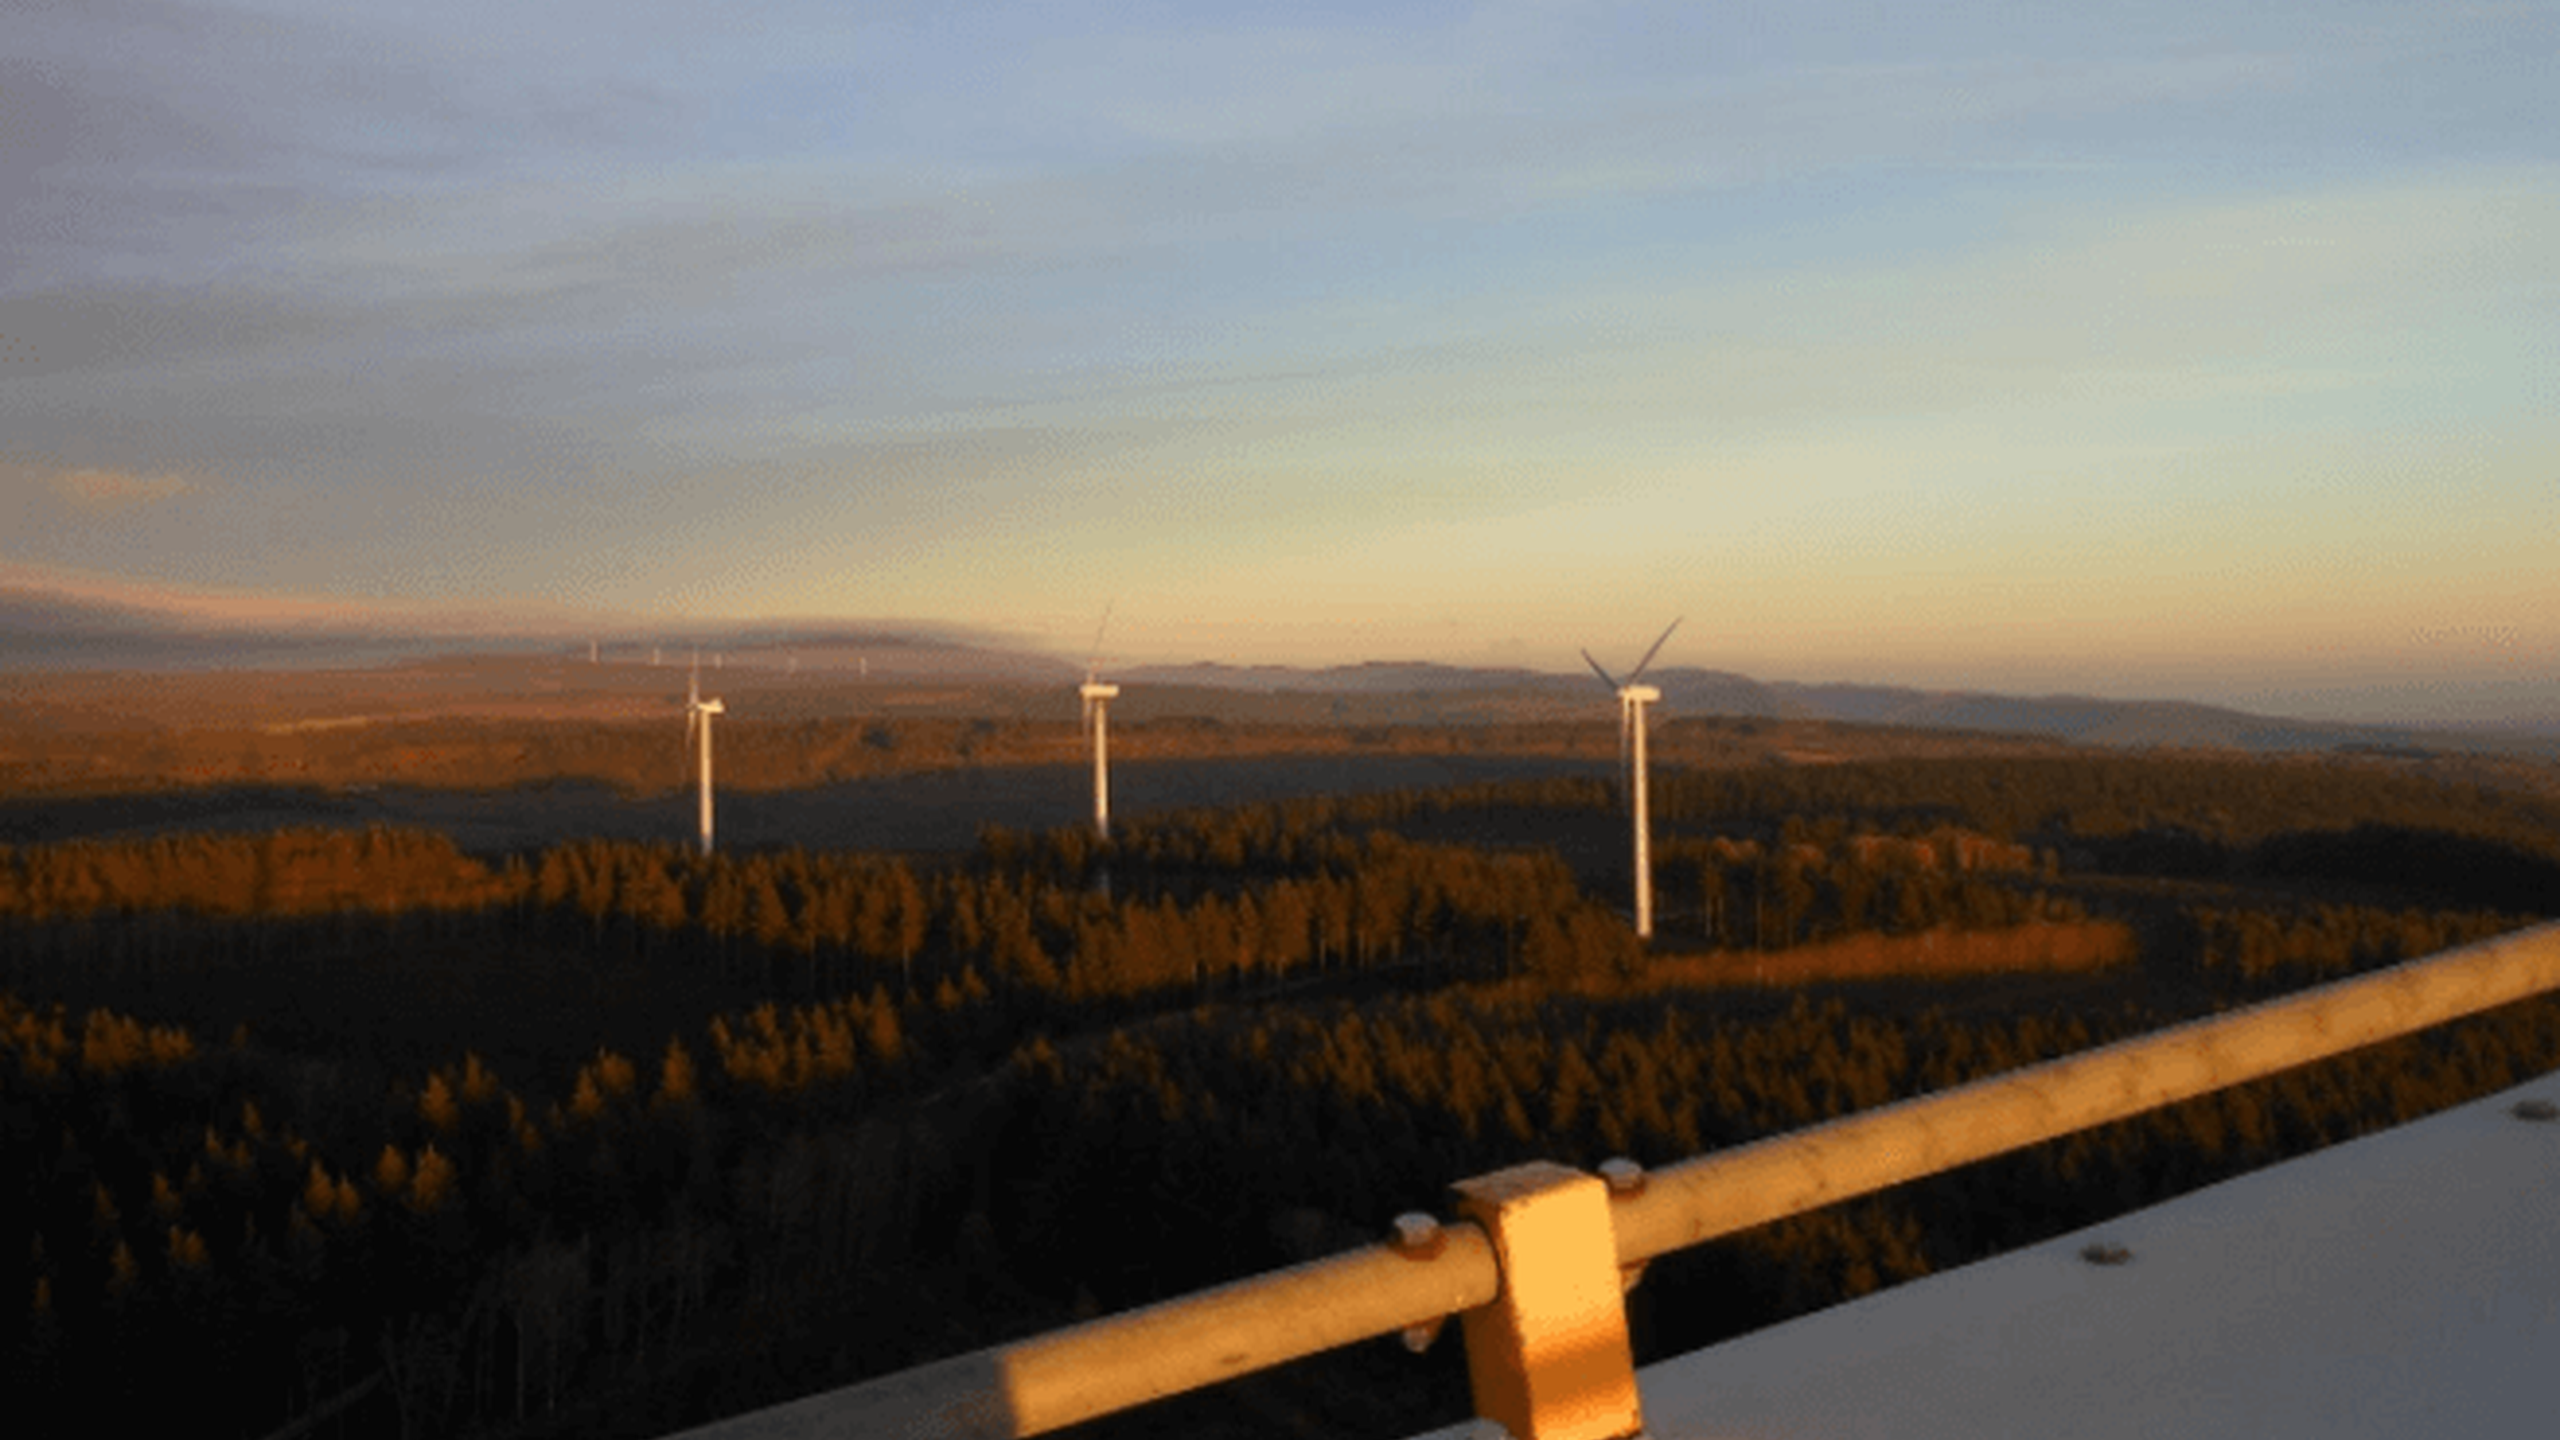 Windfit® has been installed on RES new operating windfarm in France